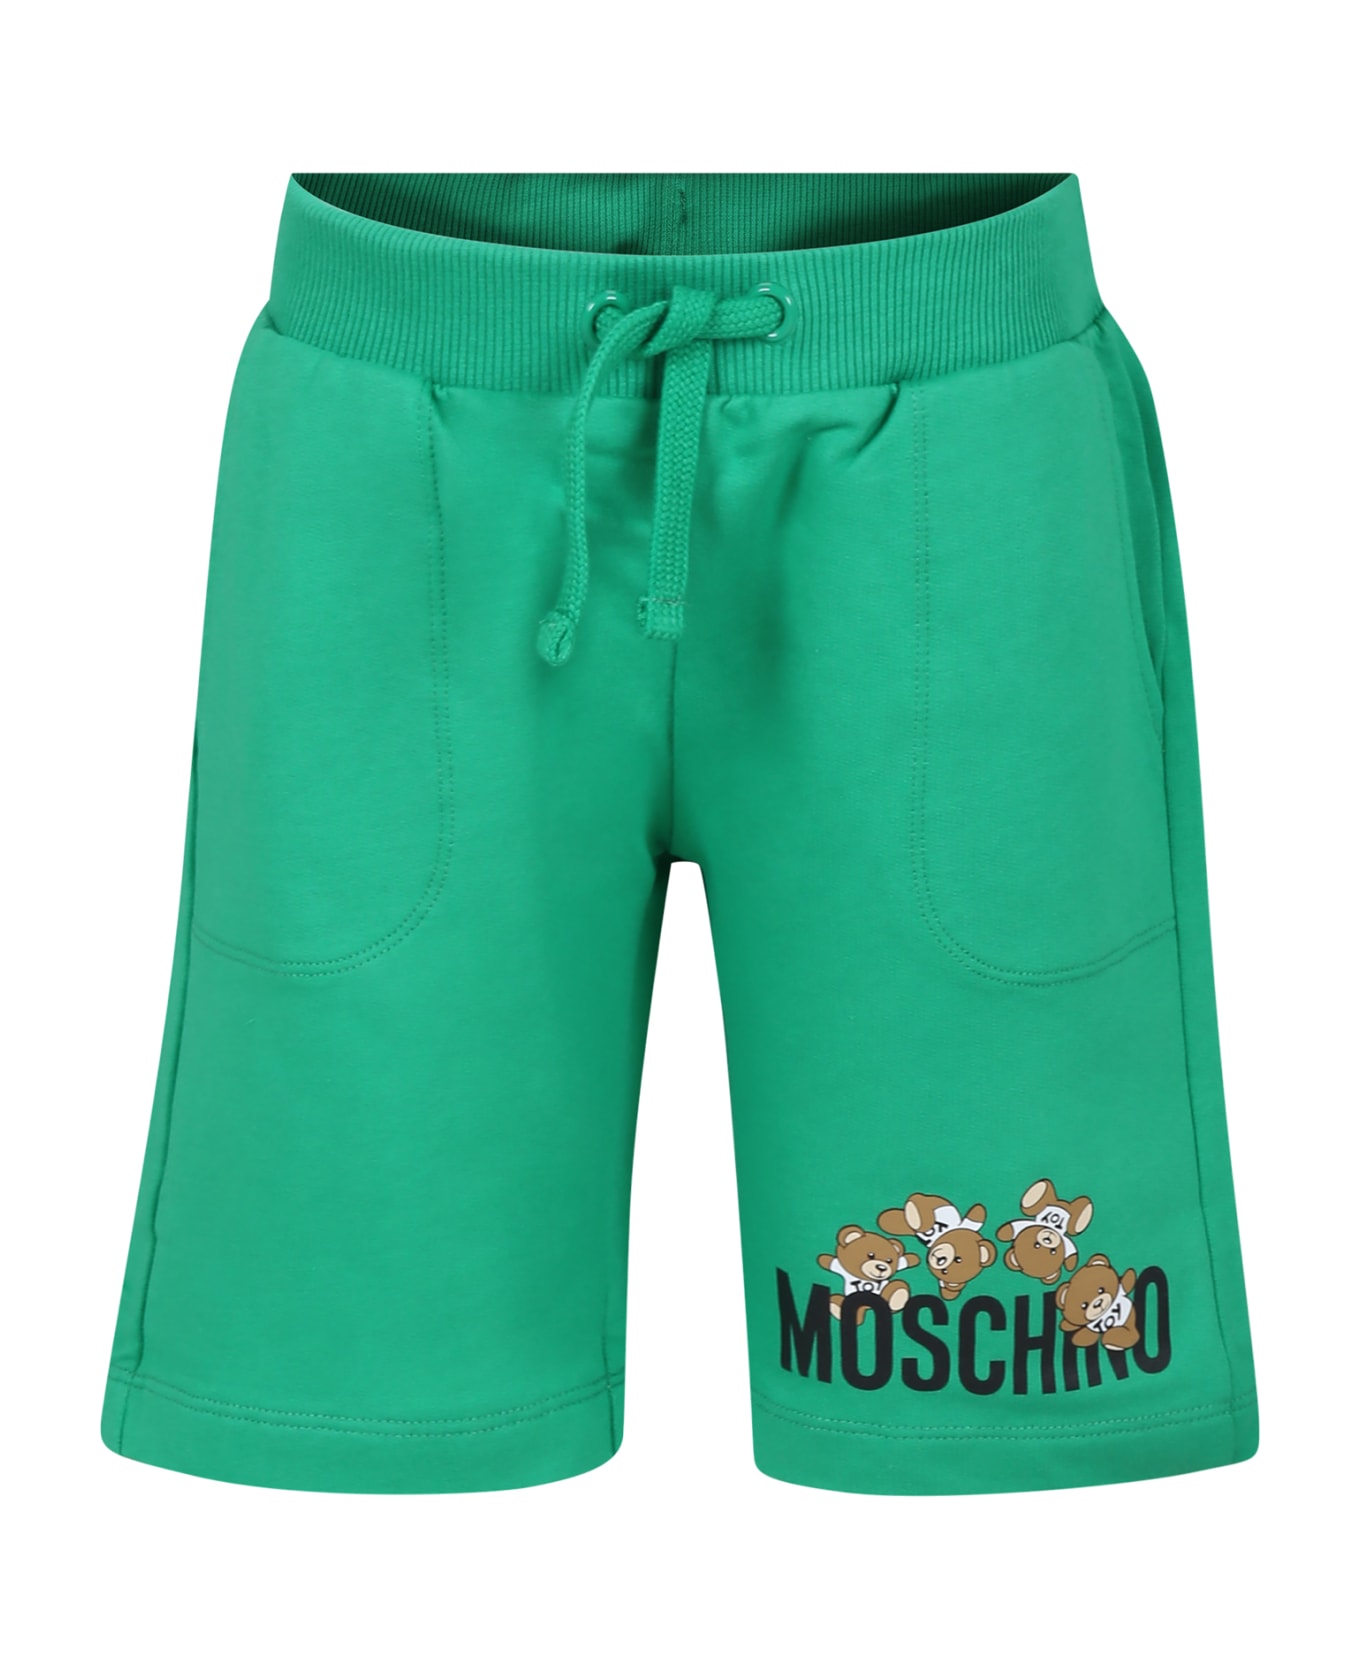 Moschino Green Shorts For Kids With Teddy Bears And Logo - Green